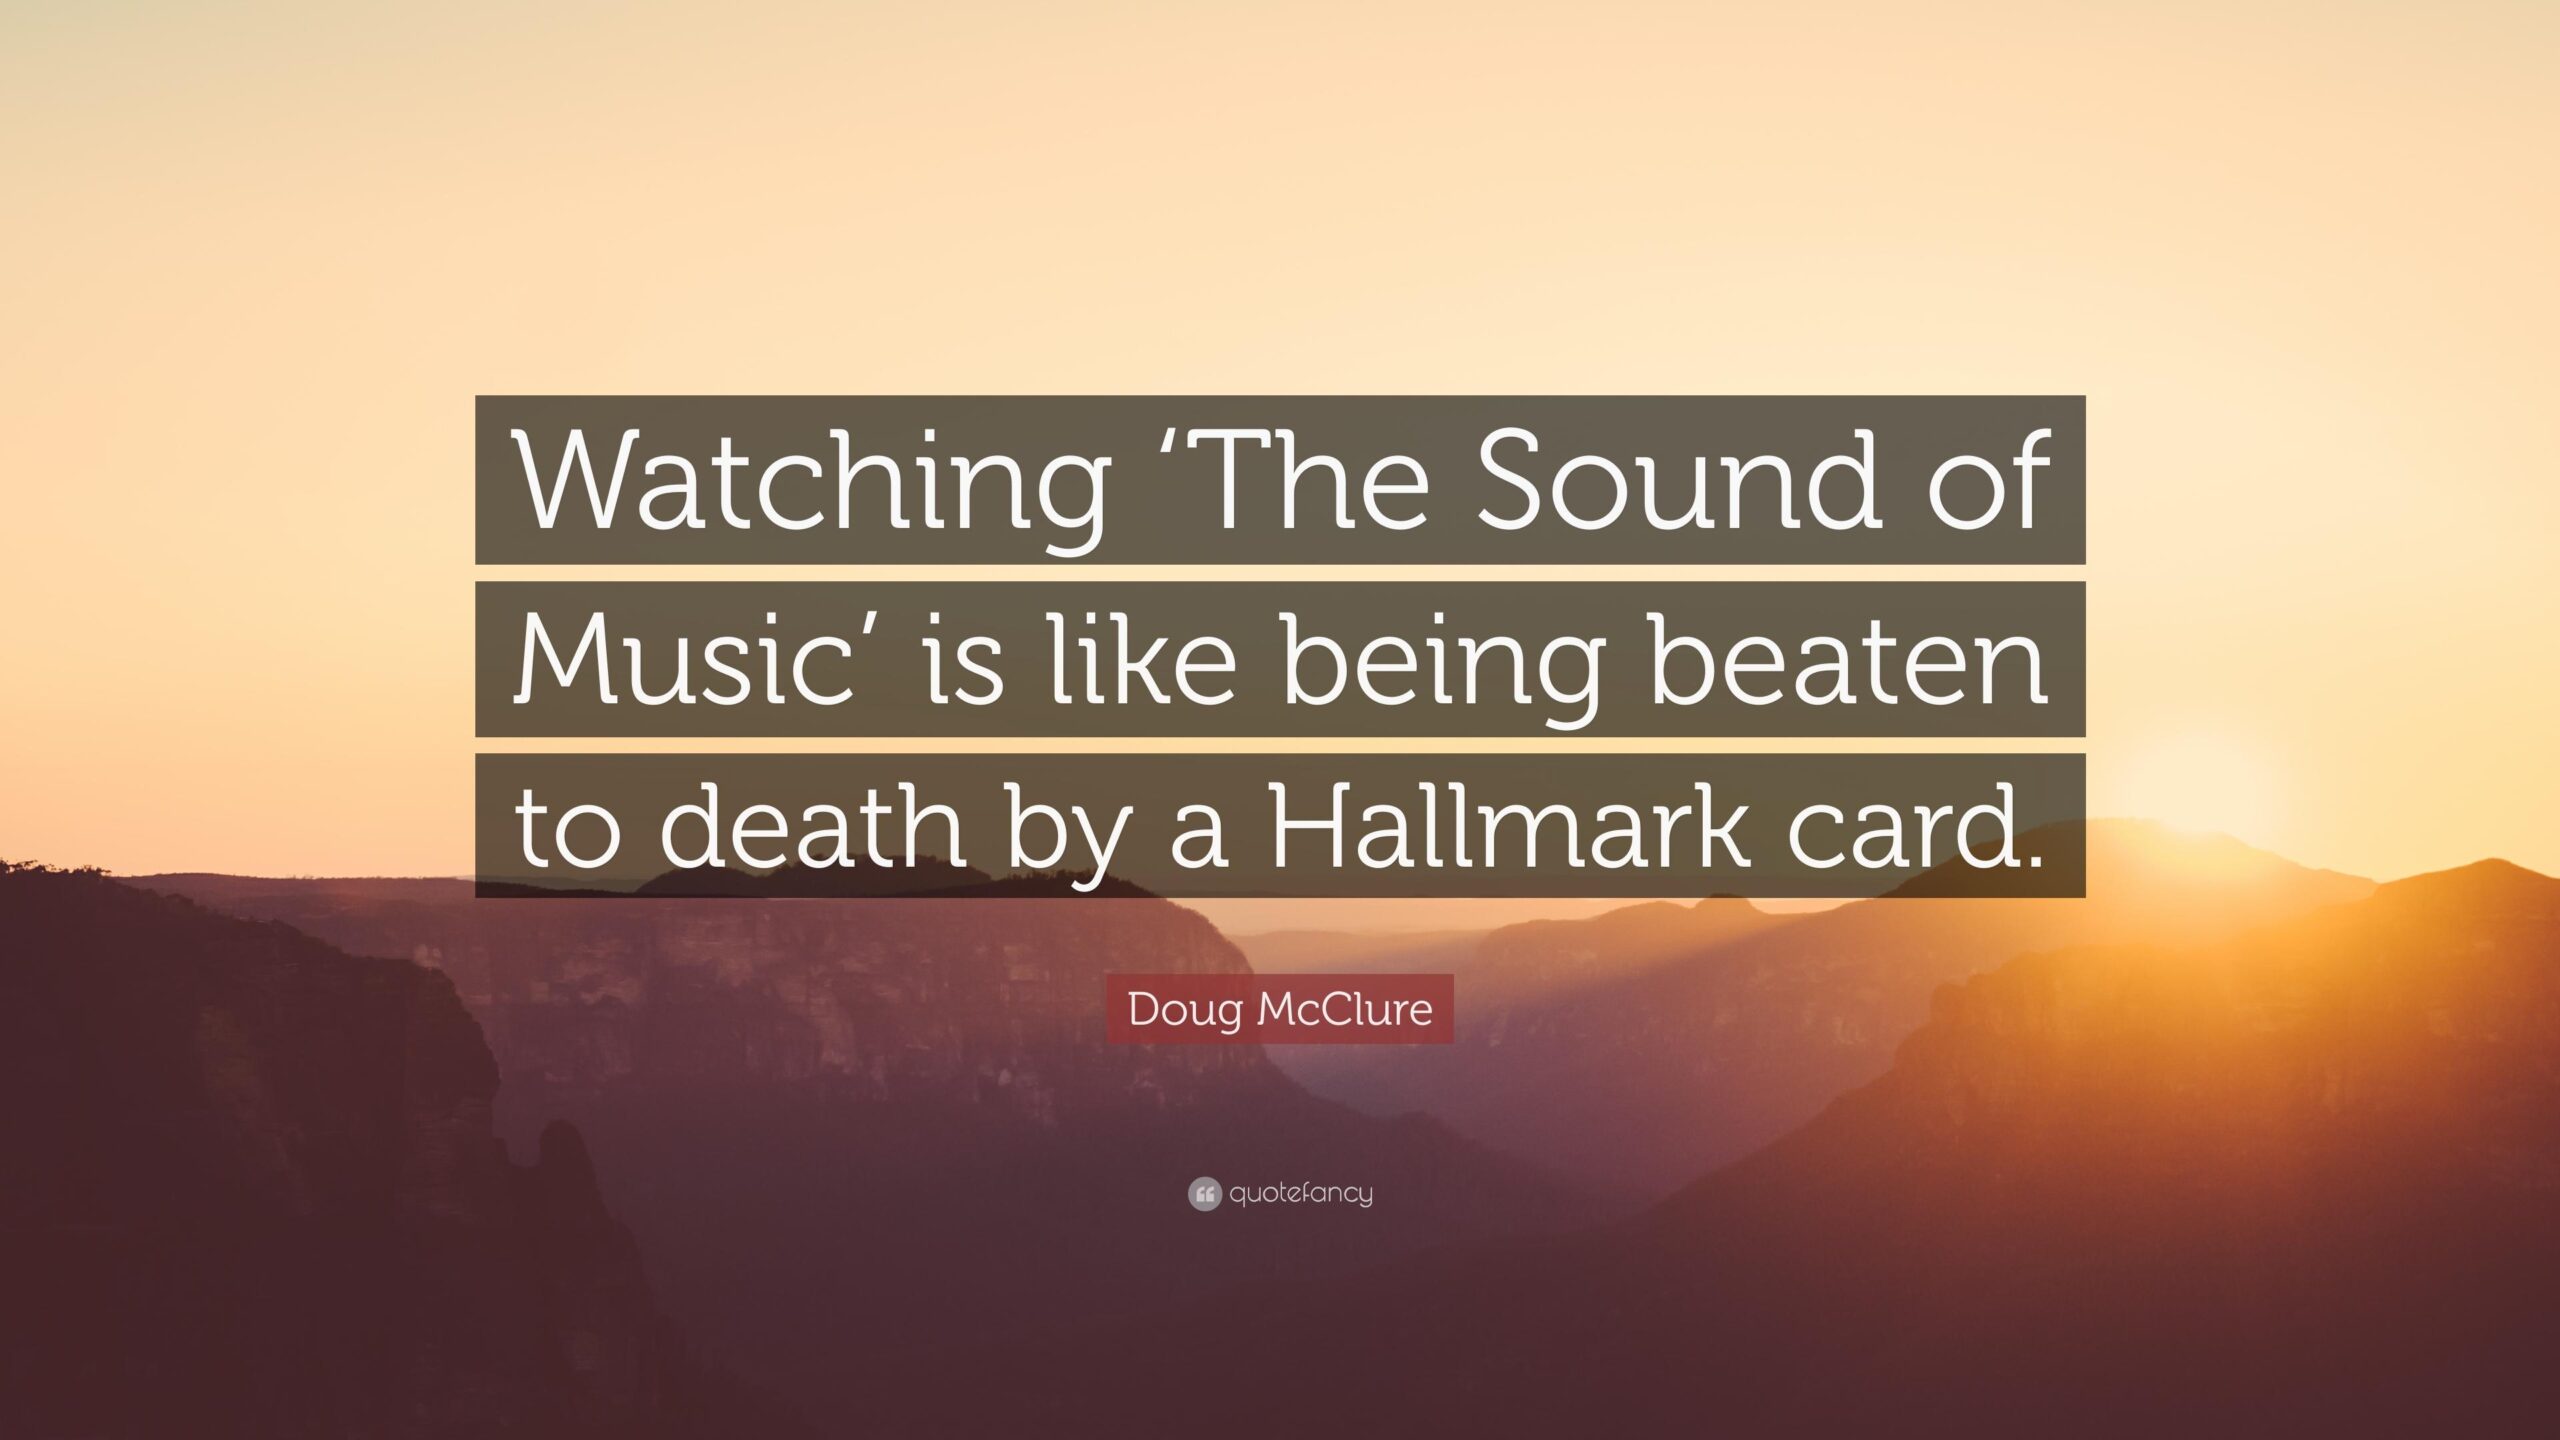 Doug McClure Quote “Watching ‘The Sound of Music’ is like being